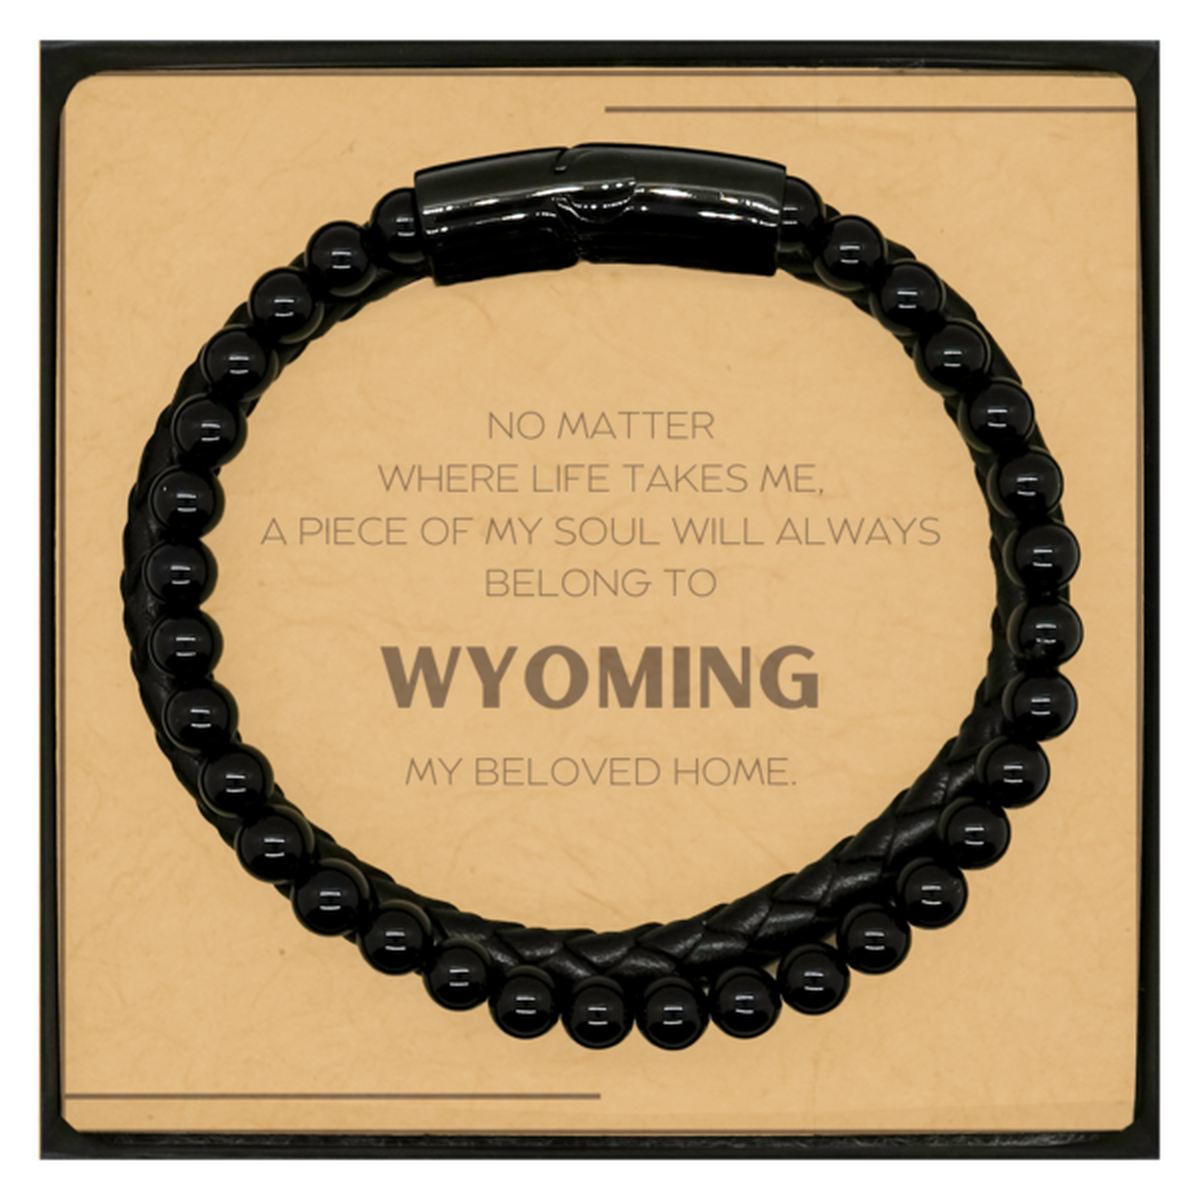 Love Wyoming State Gifts, My soul will always belong to Wyoming, Proud Stone Leather Bracelets, Birthday Christmas Unique Gifts For Wyoming Men, Women, Friends